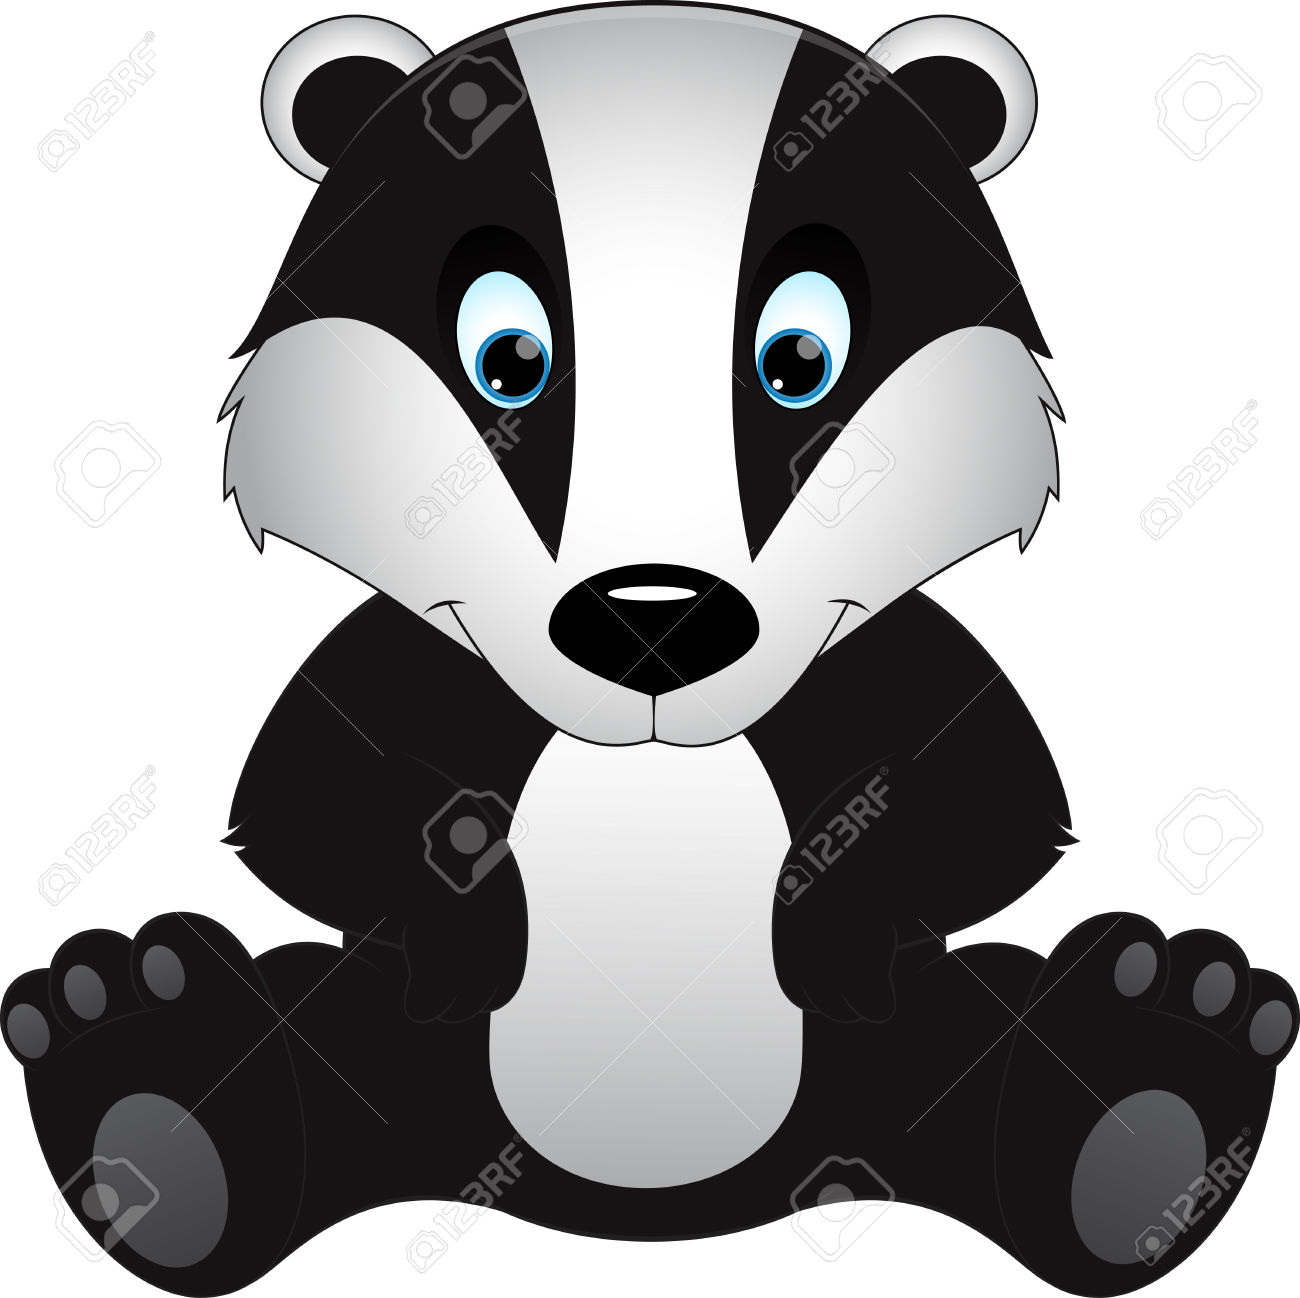 448 Badger free clipart.